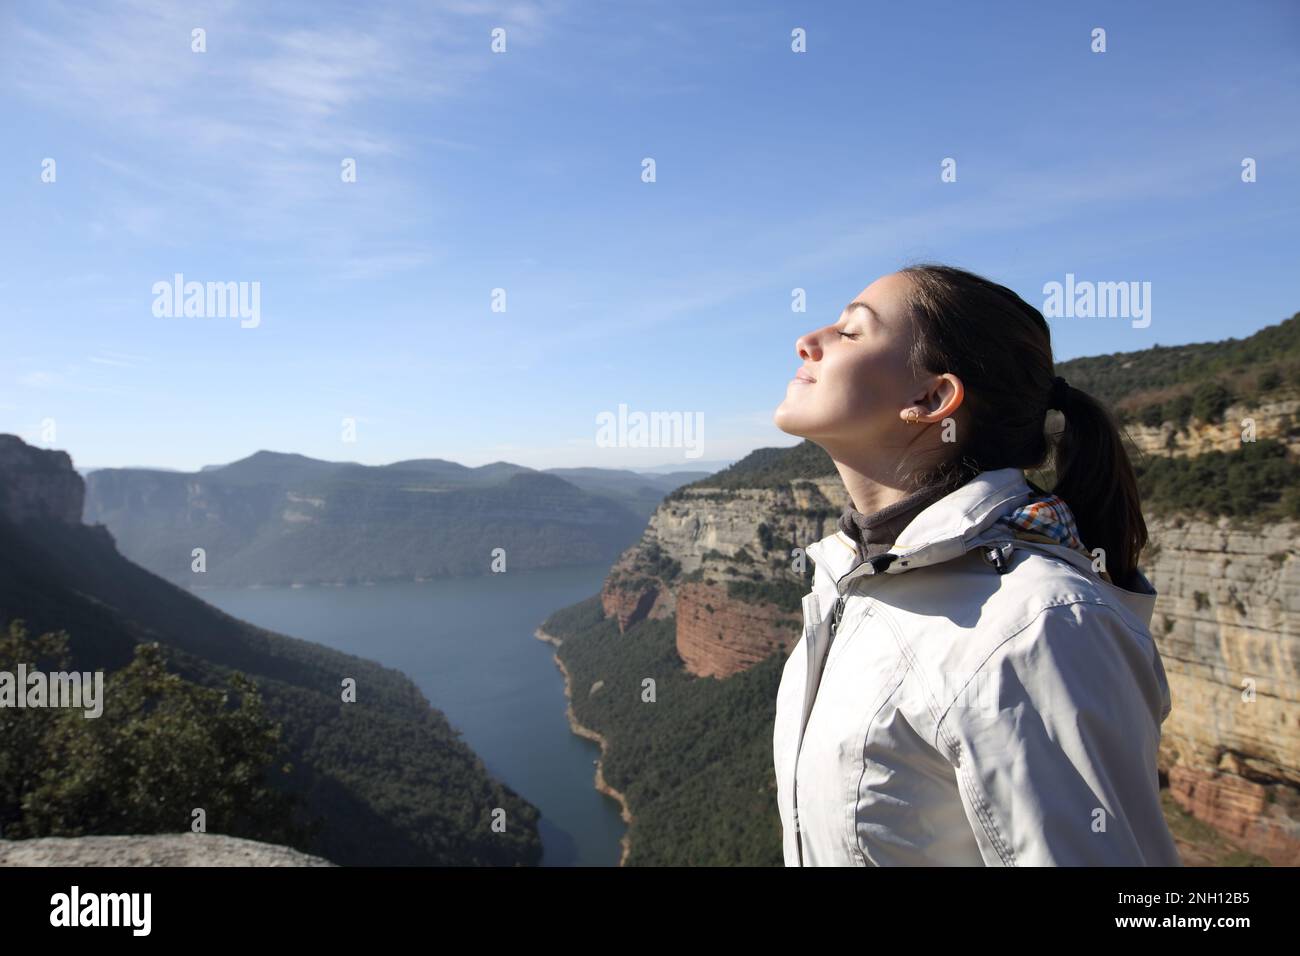 Profile of a hiker breathing in a landscape Stock Photo